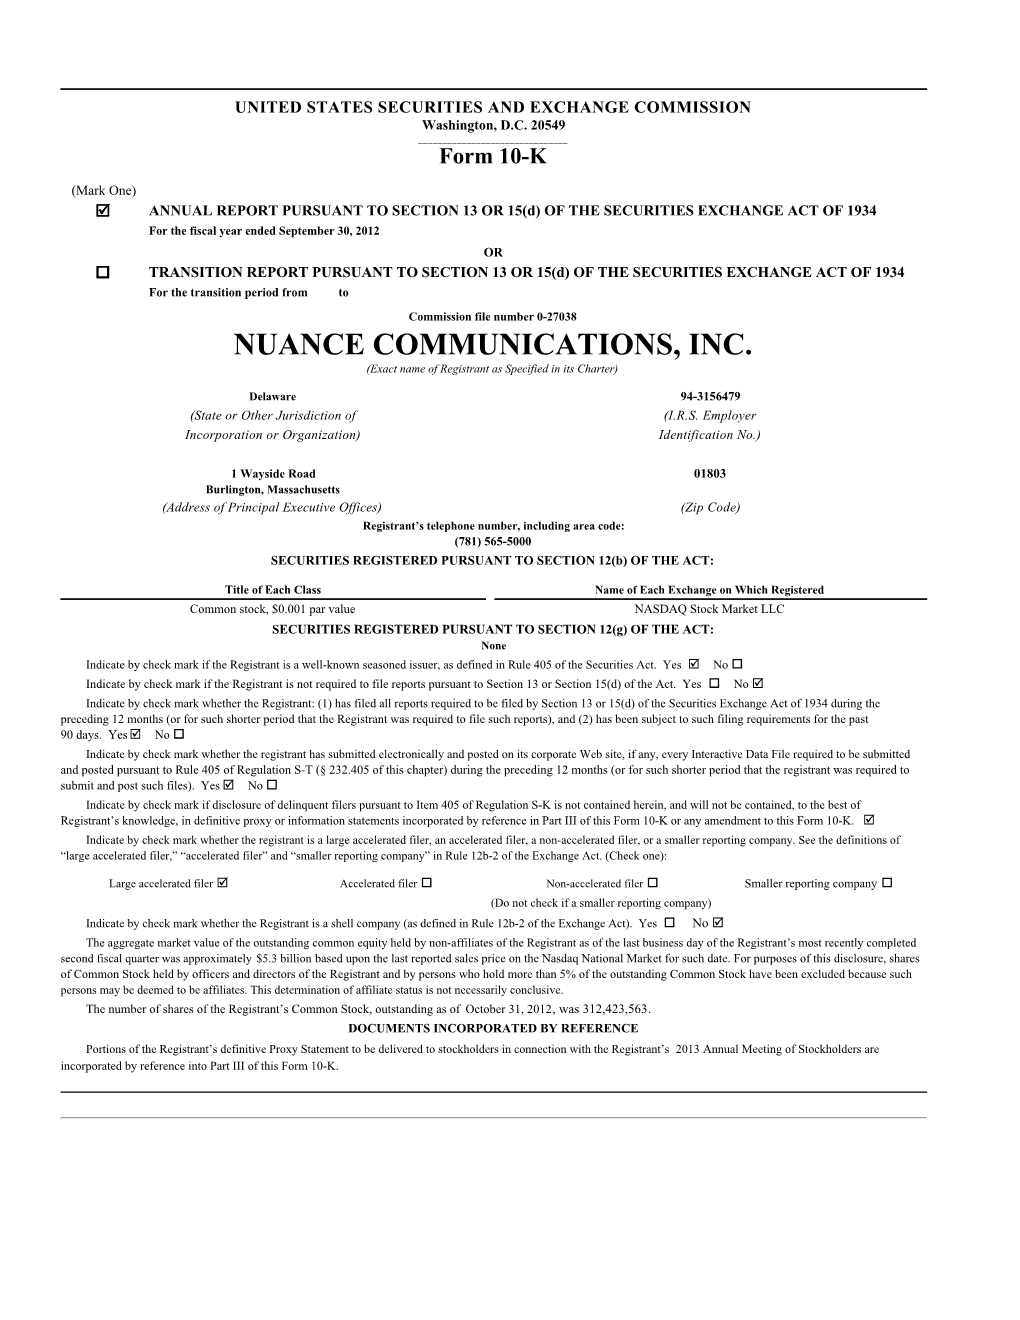 NUANCE COMMUNICATIONS, INC. (Exact Name of Registrant As Specified in Its Charter)